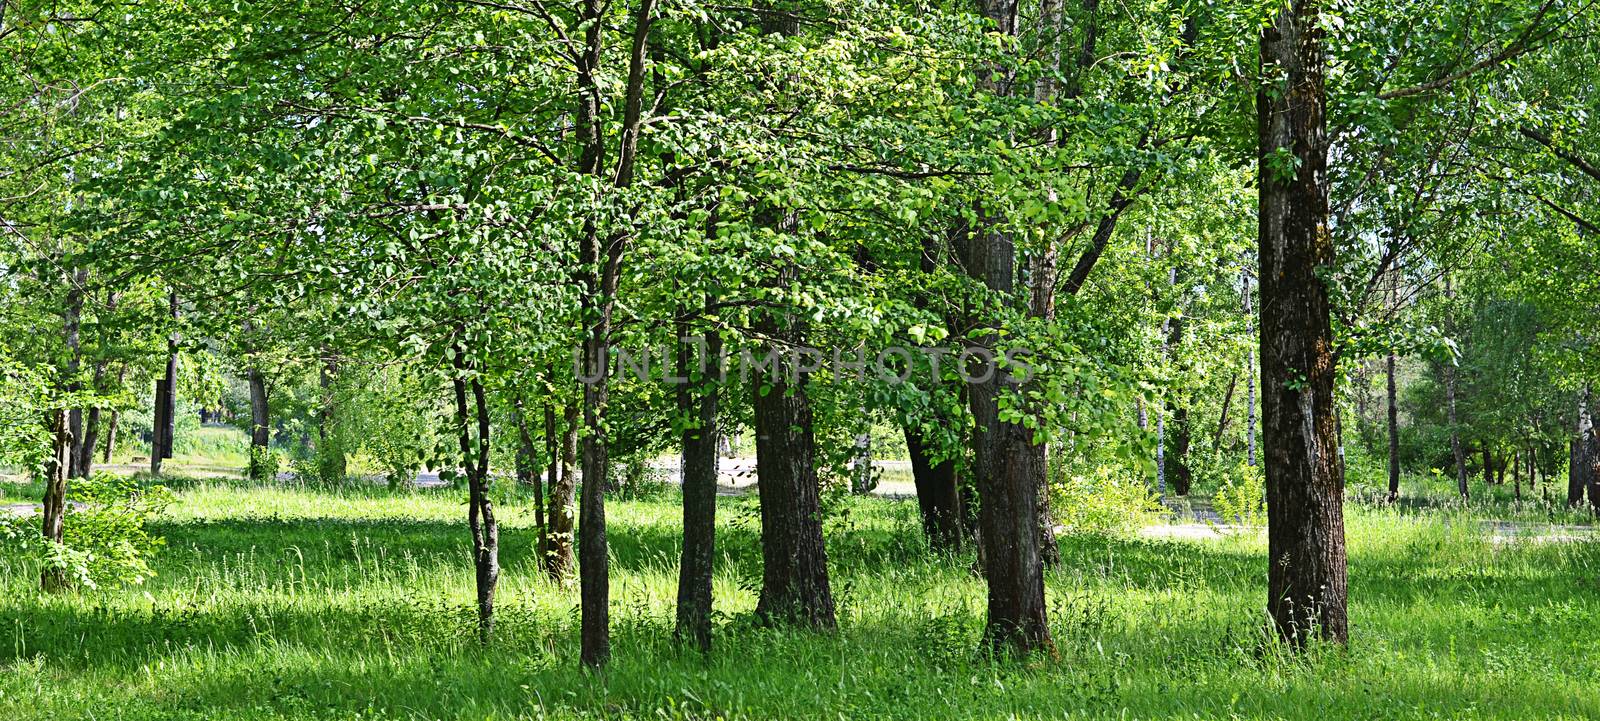 The trees in park in the summer